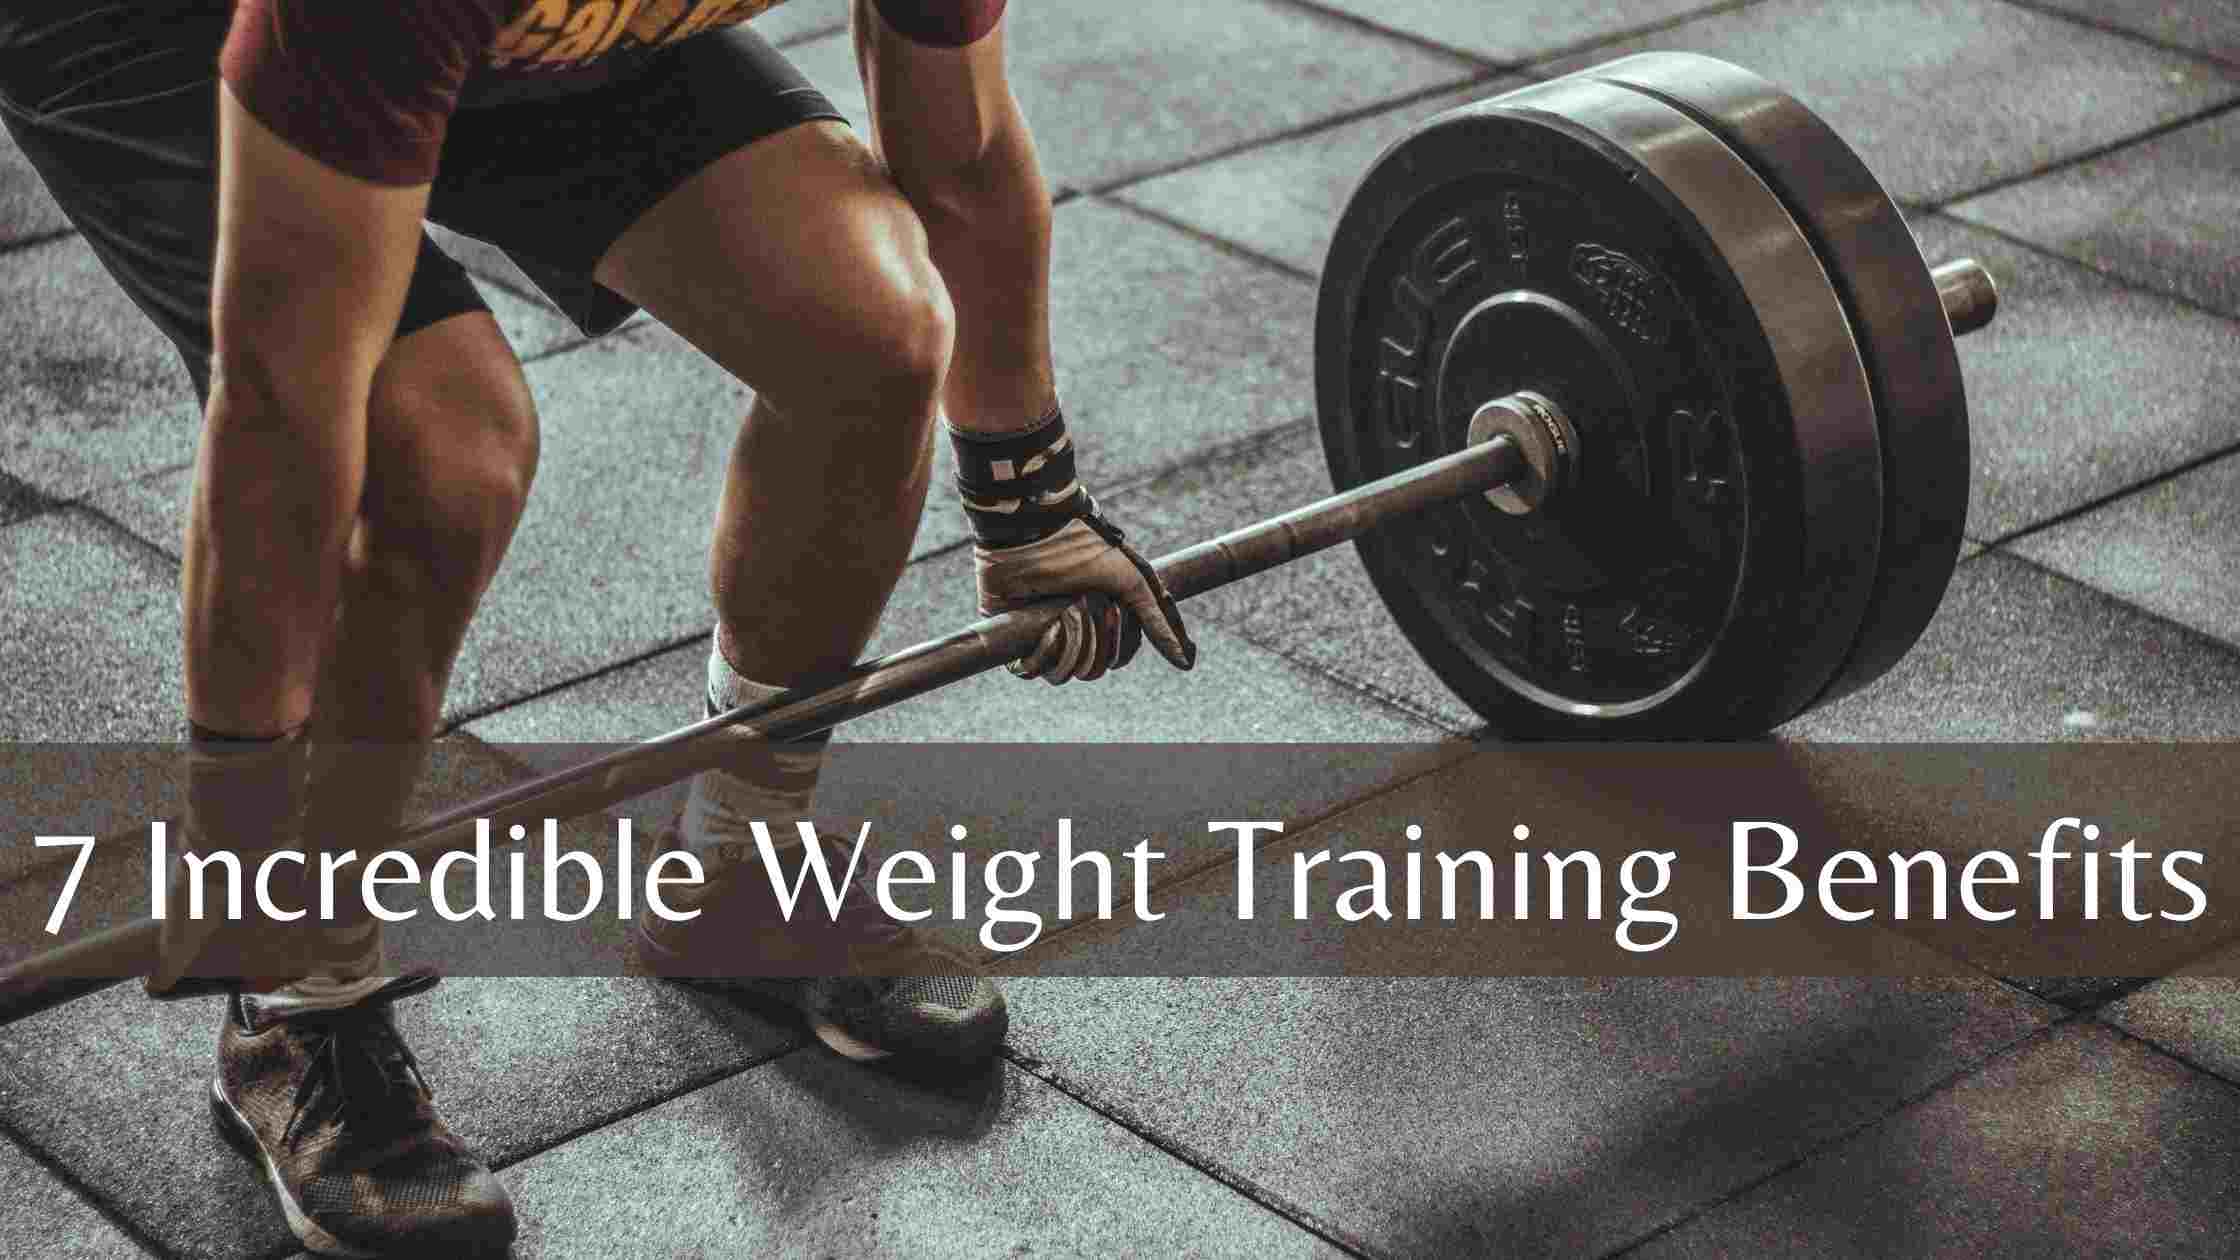 Incredible Weight Training Benefits